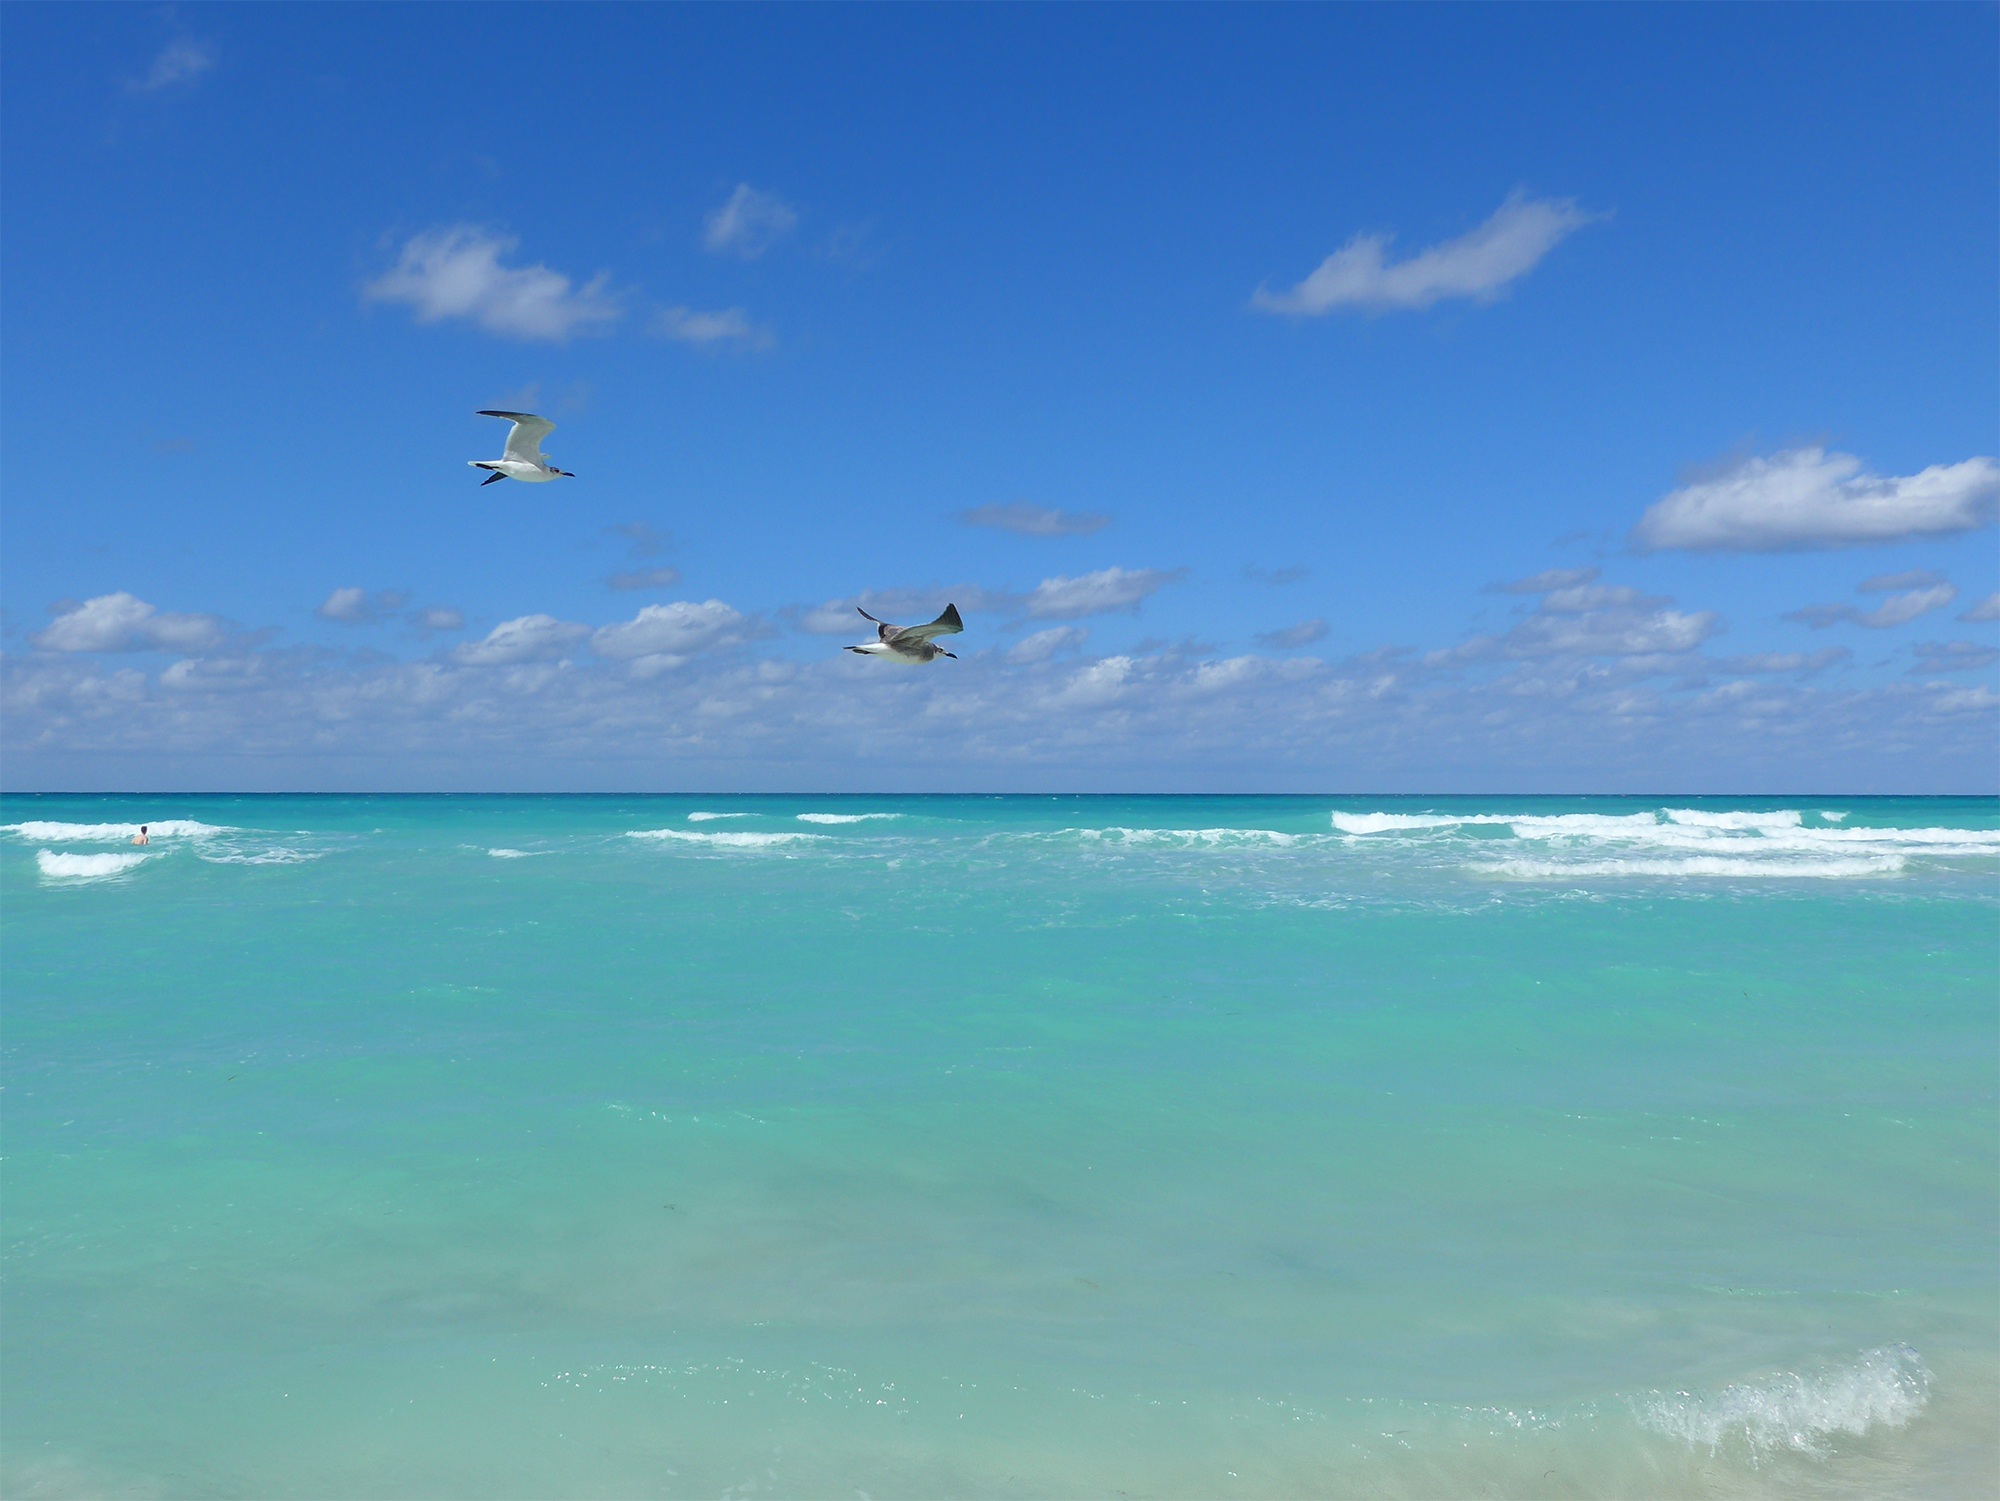 Sea gulls fly over the water in Cuba